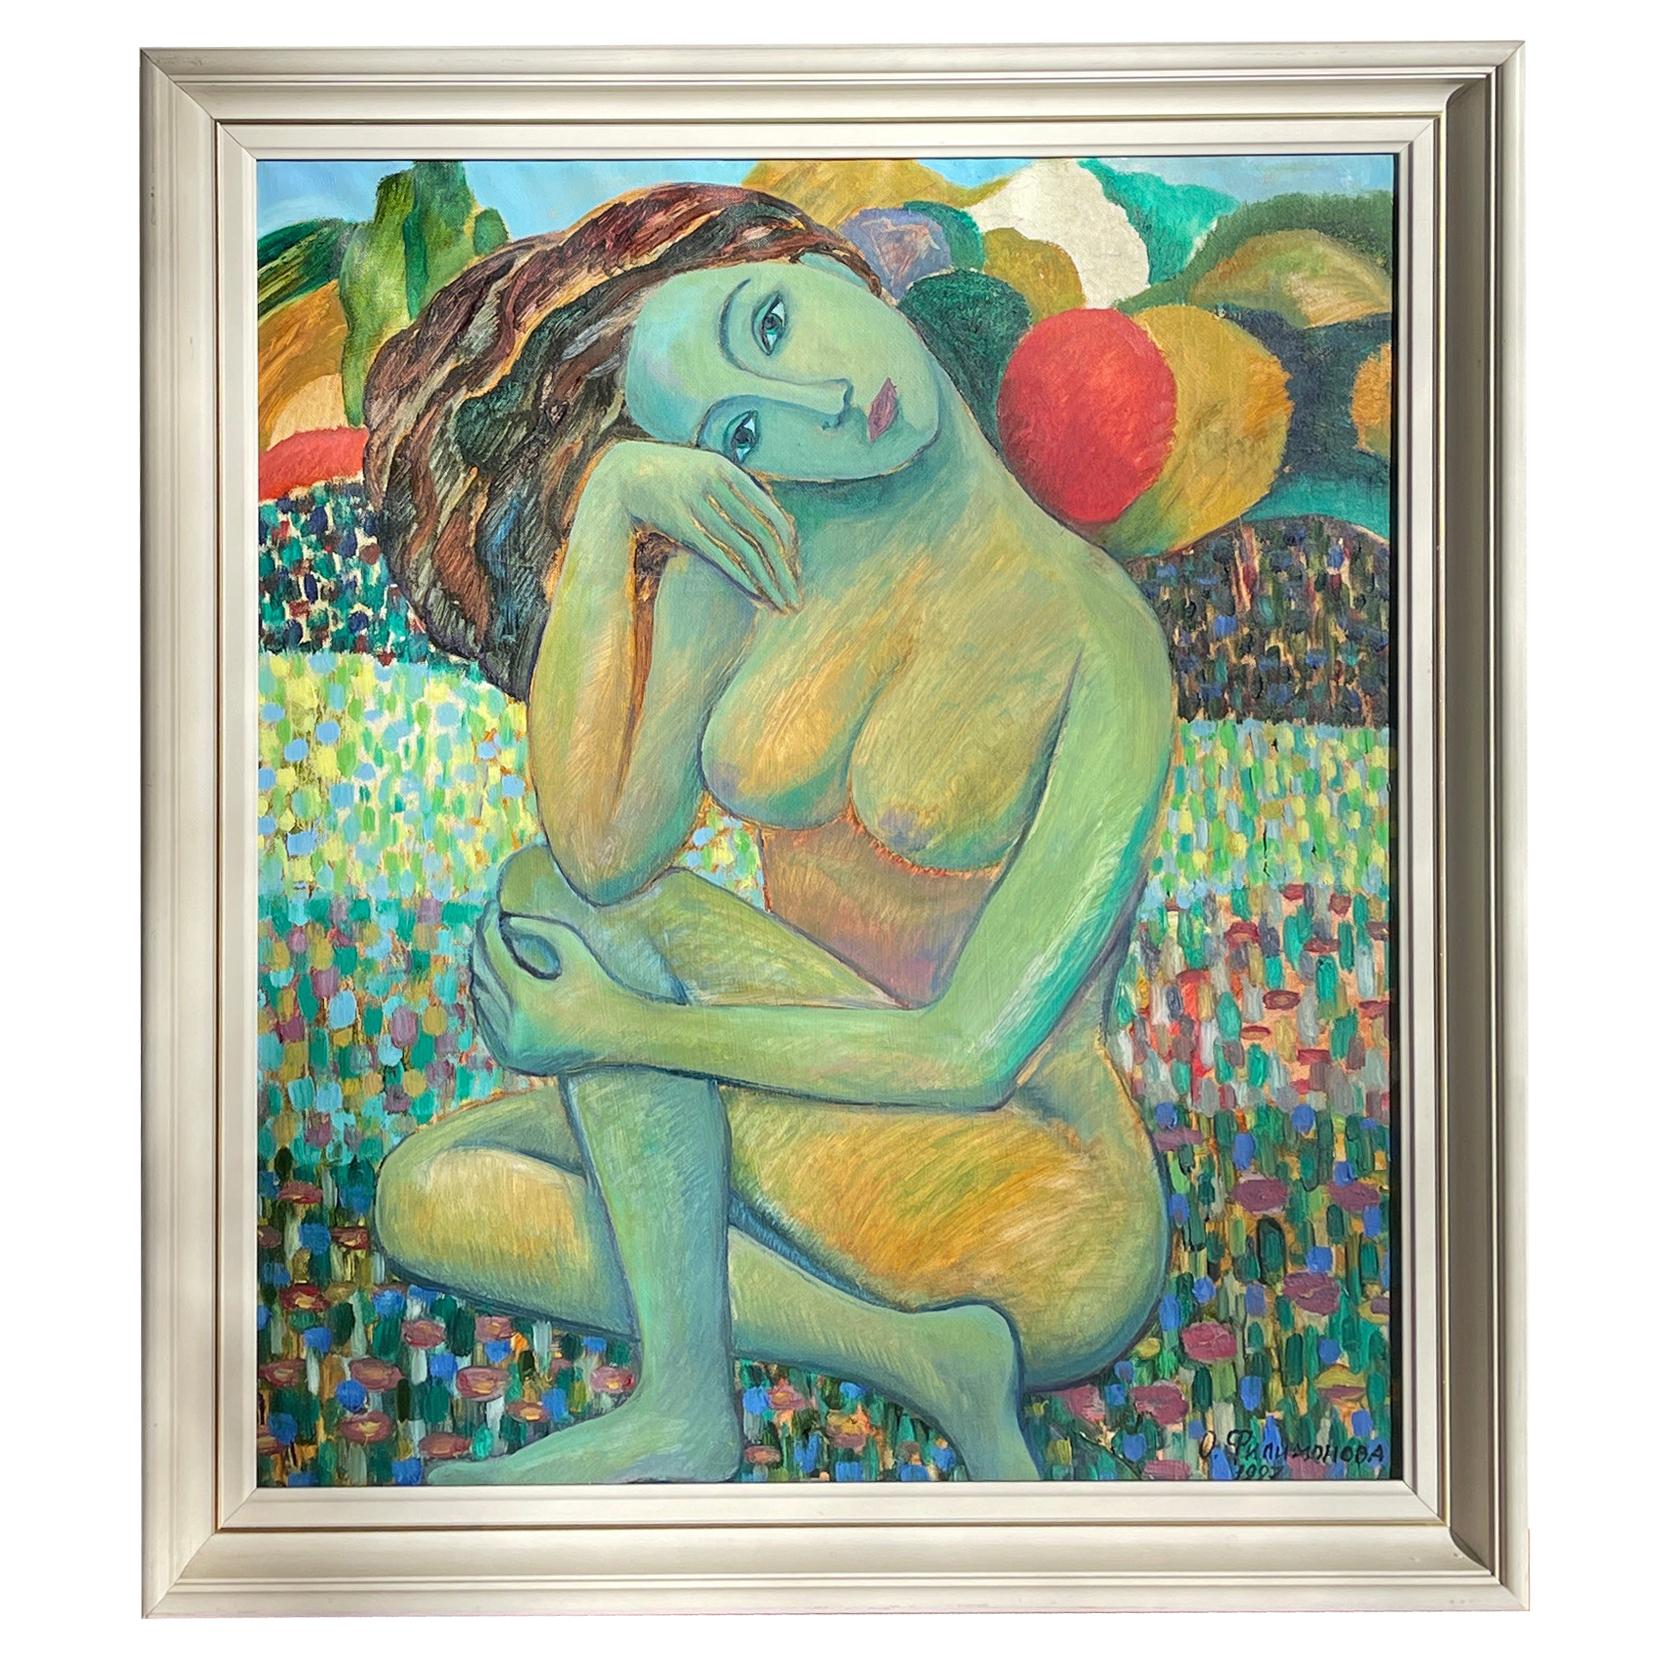 Oil on Canvas Painting of a Nude Woman by O. Phnumohosa, Dated 1997